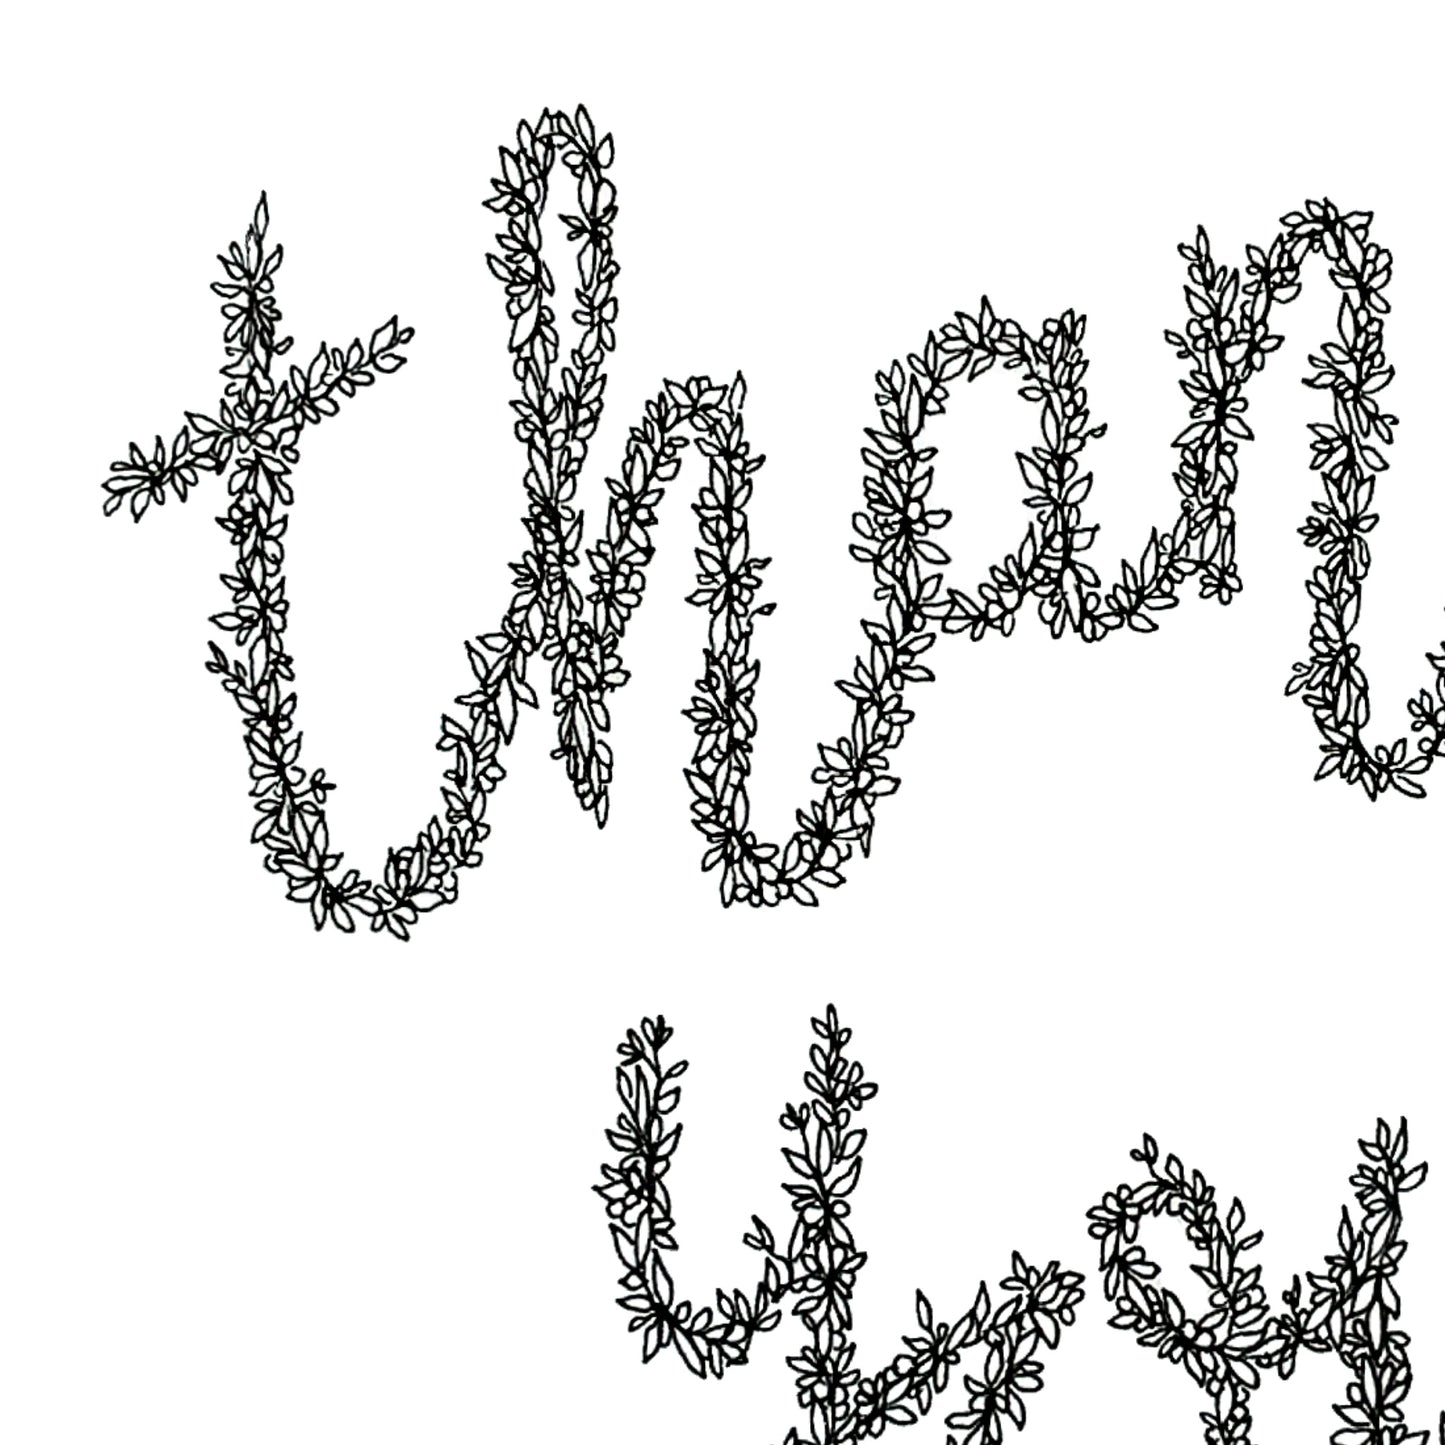 Image shows Thank you card made from black floral drawing. image shown in a close up view to detail floral drawings. 